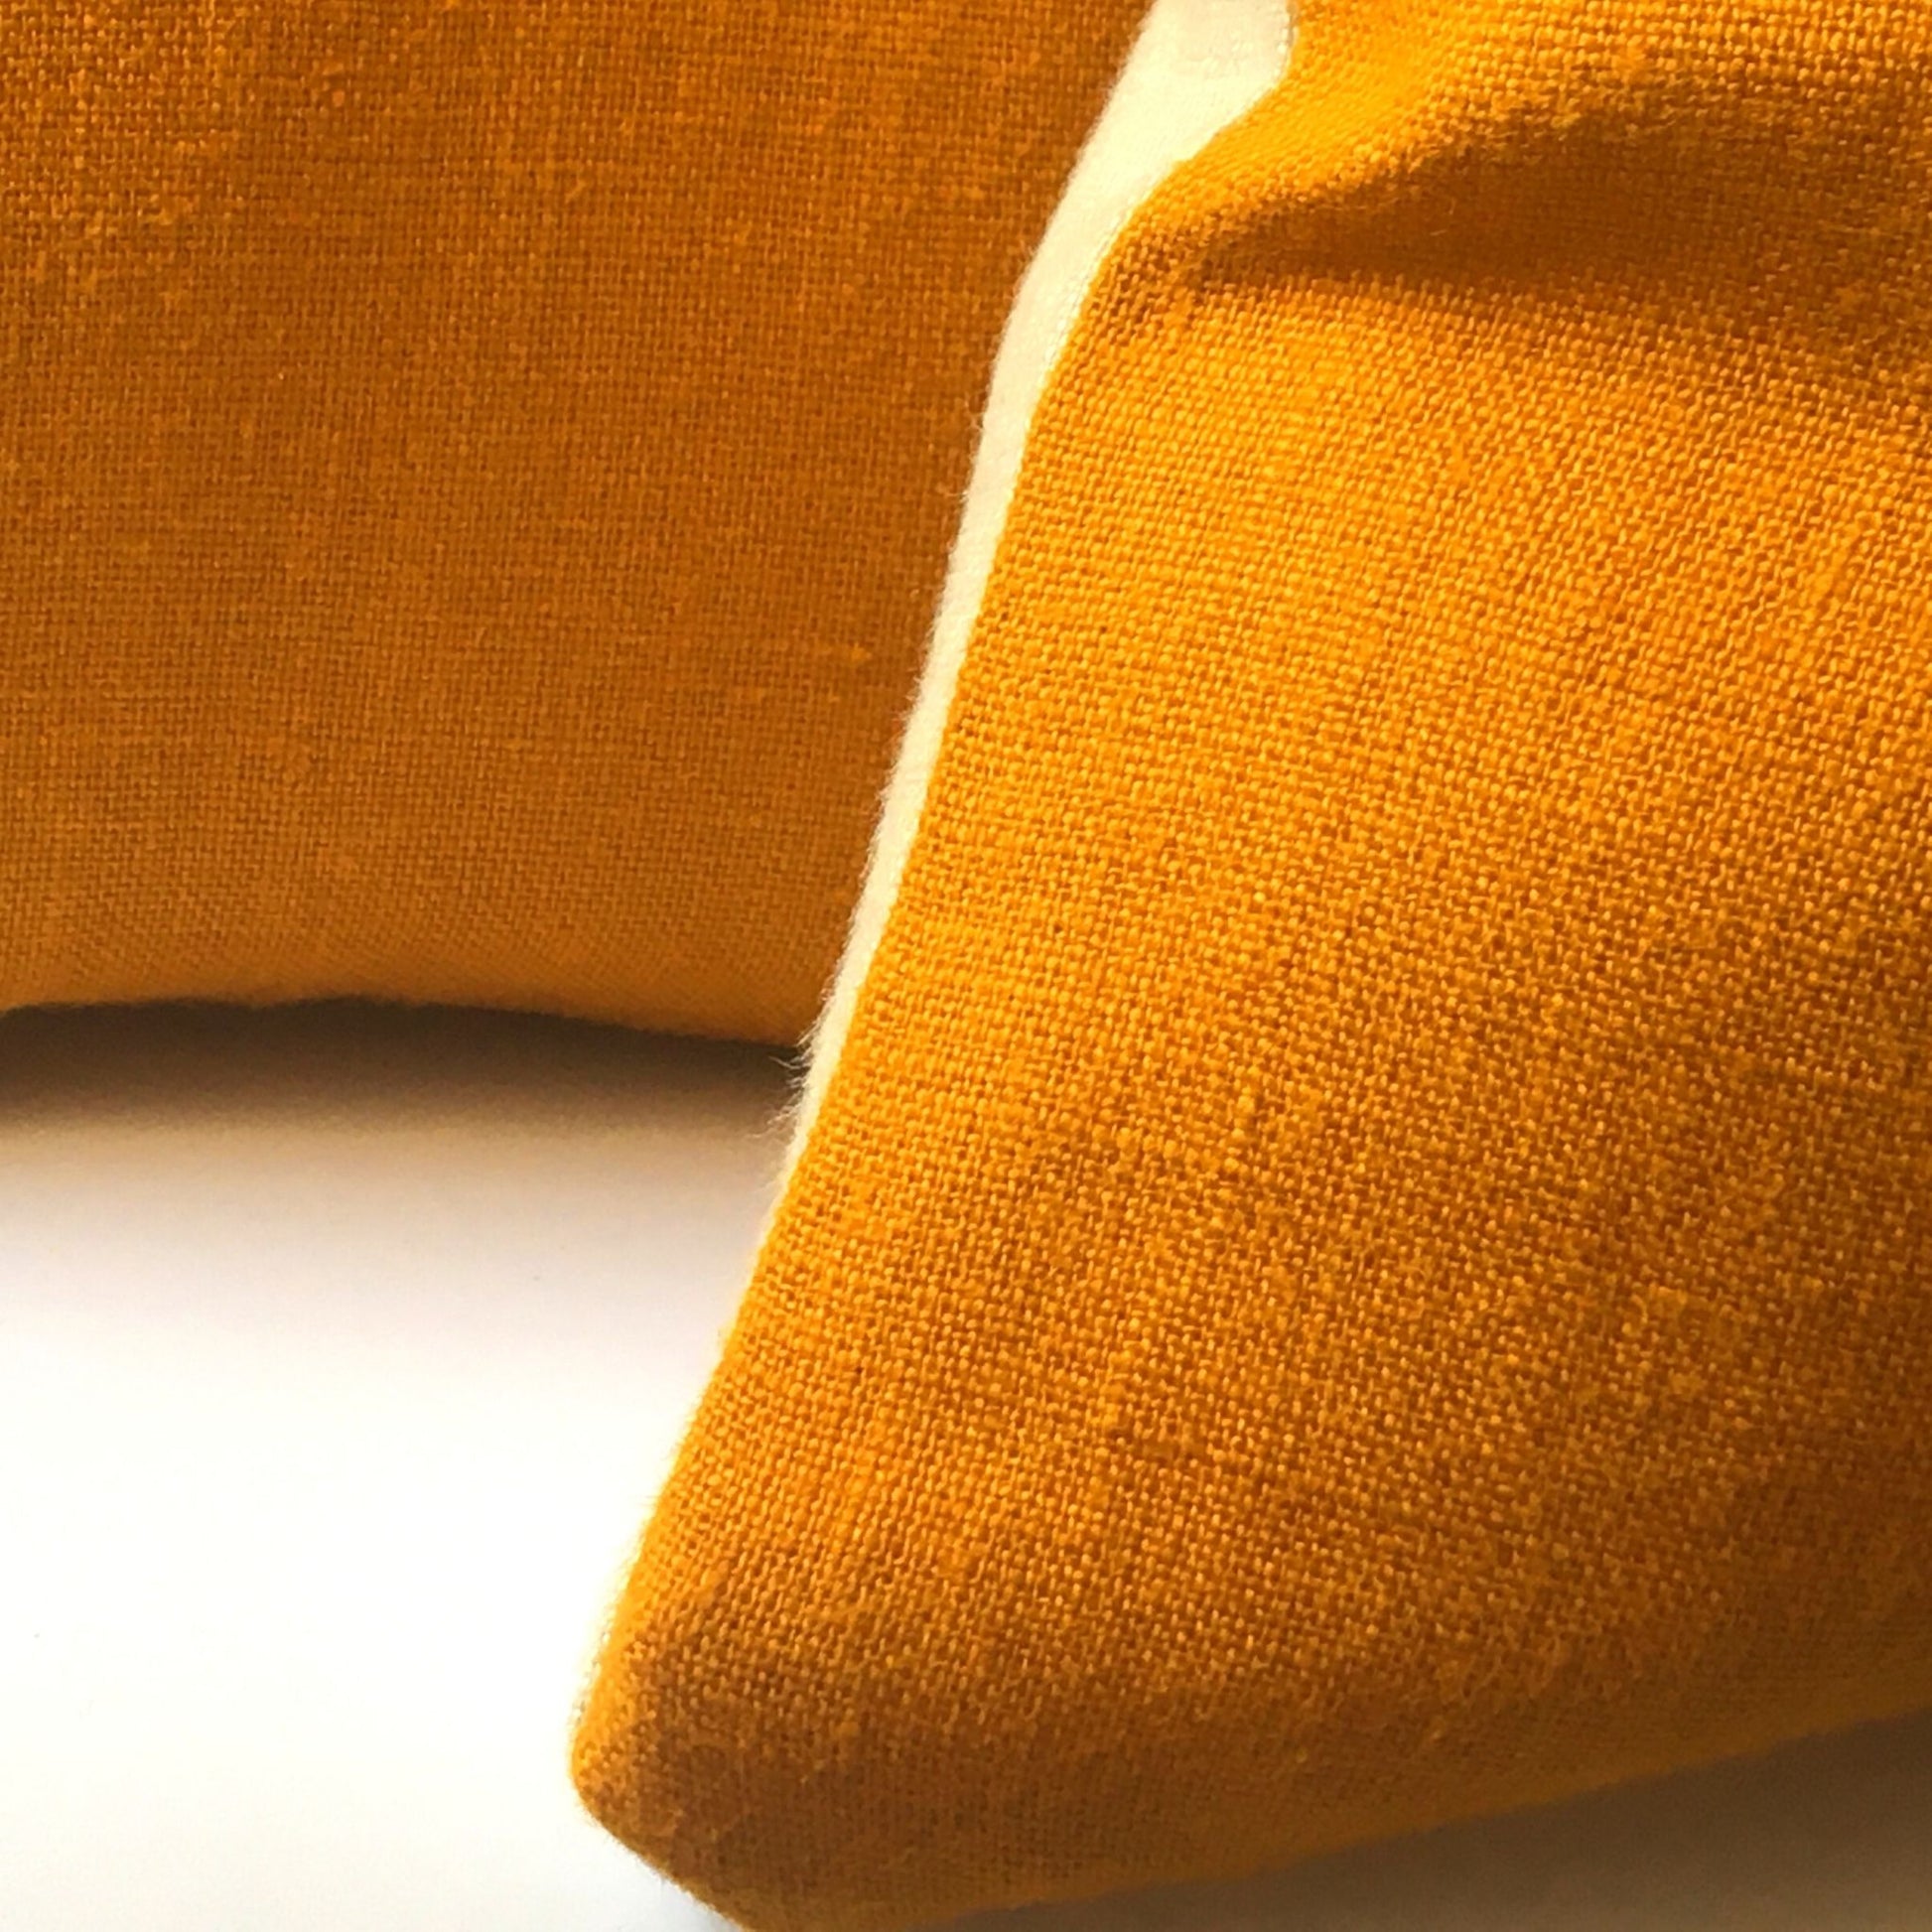 yellow cushion cover, neutral base details of corner